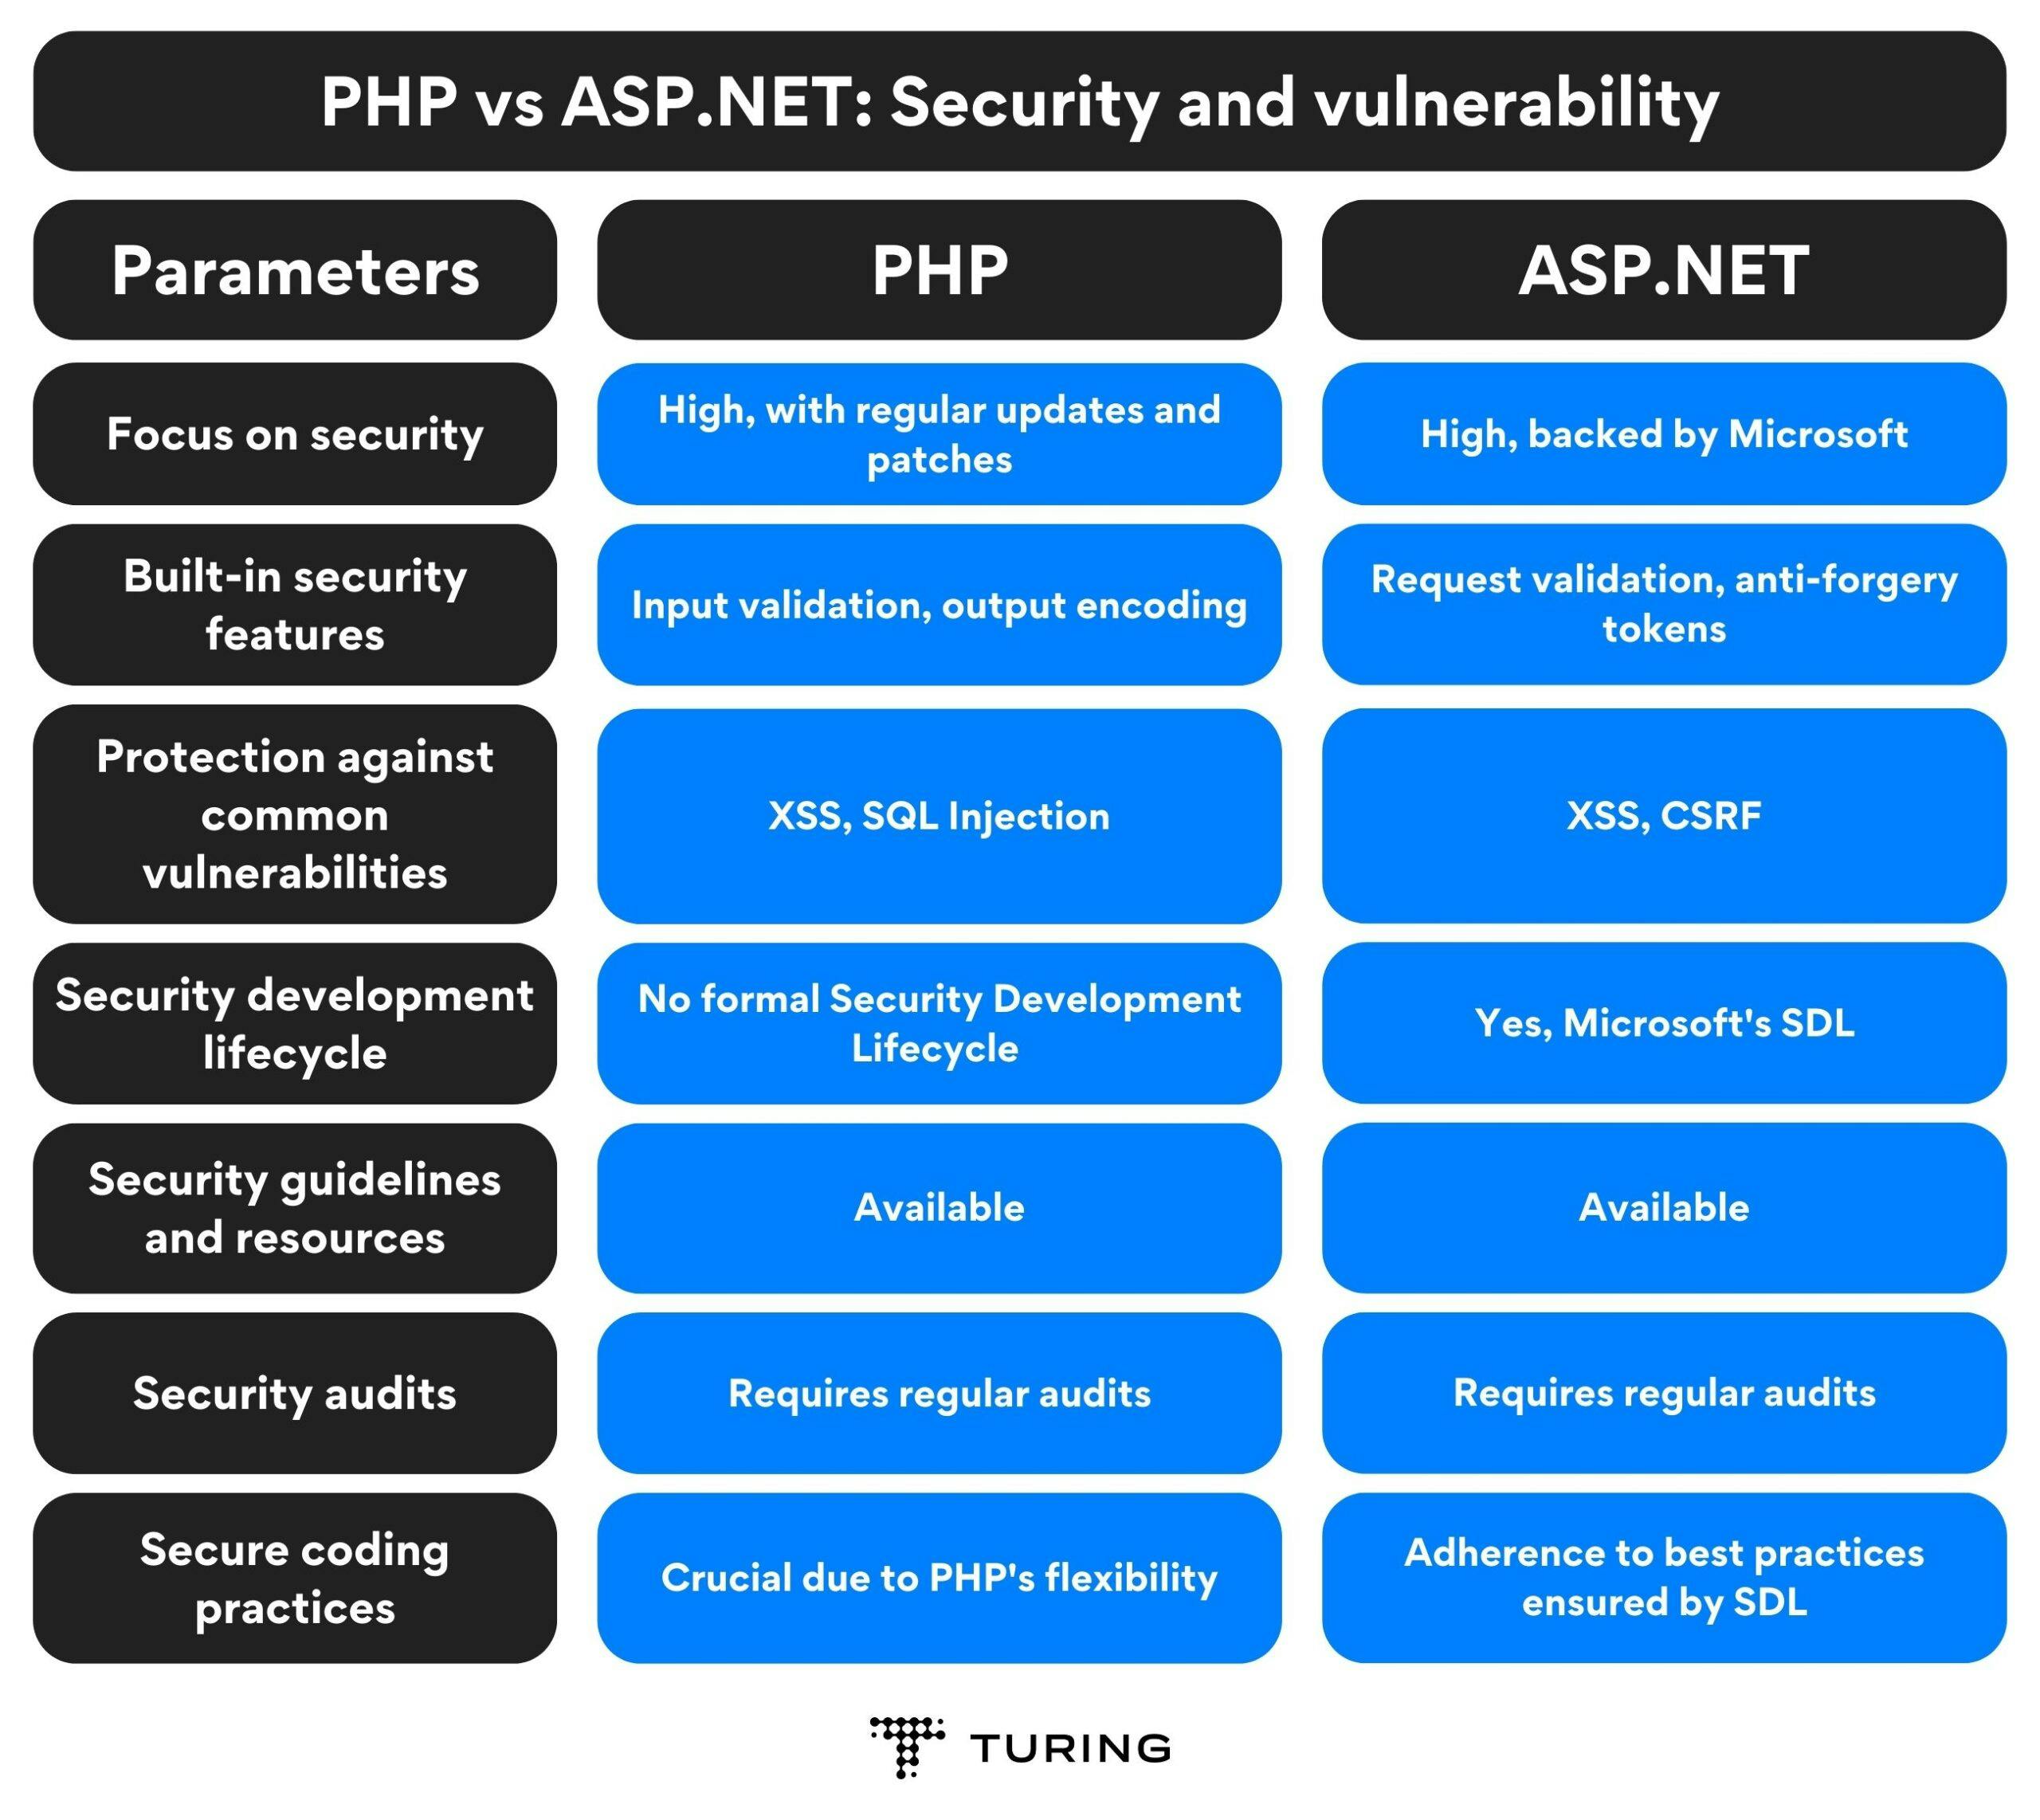 PHP vs ASP.NET: Security and vulnerability